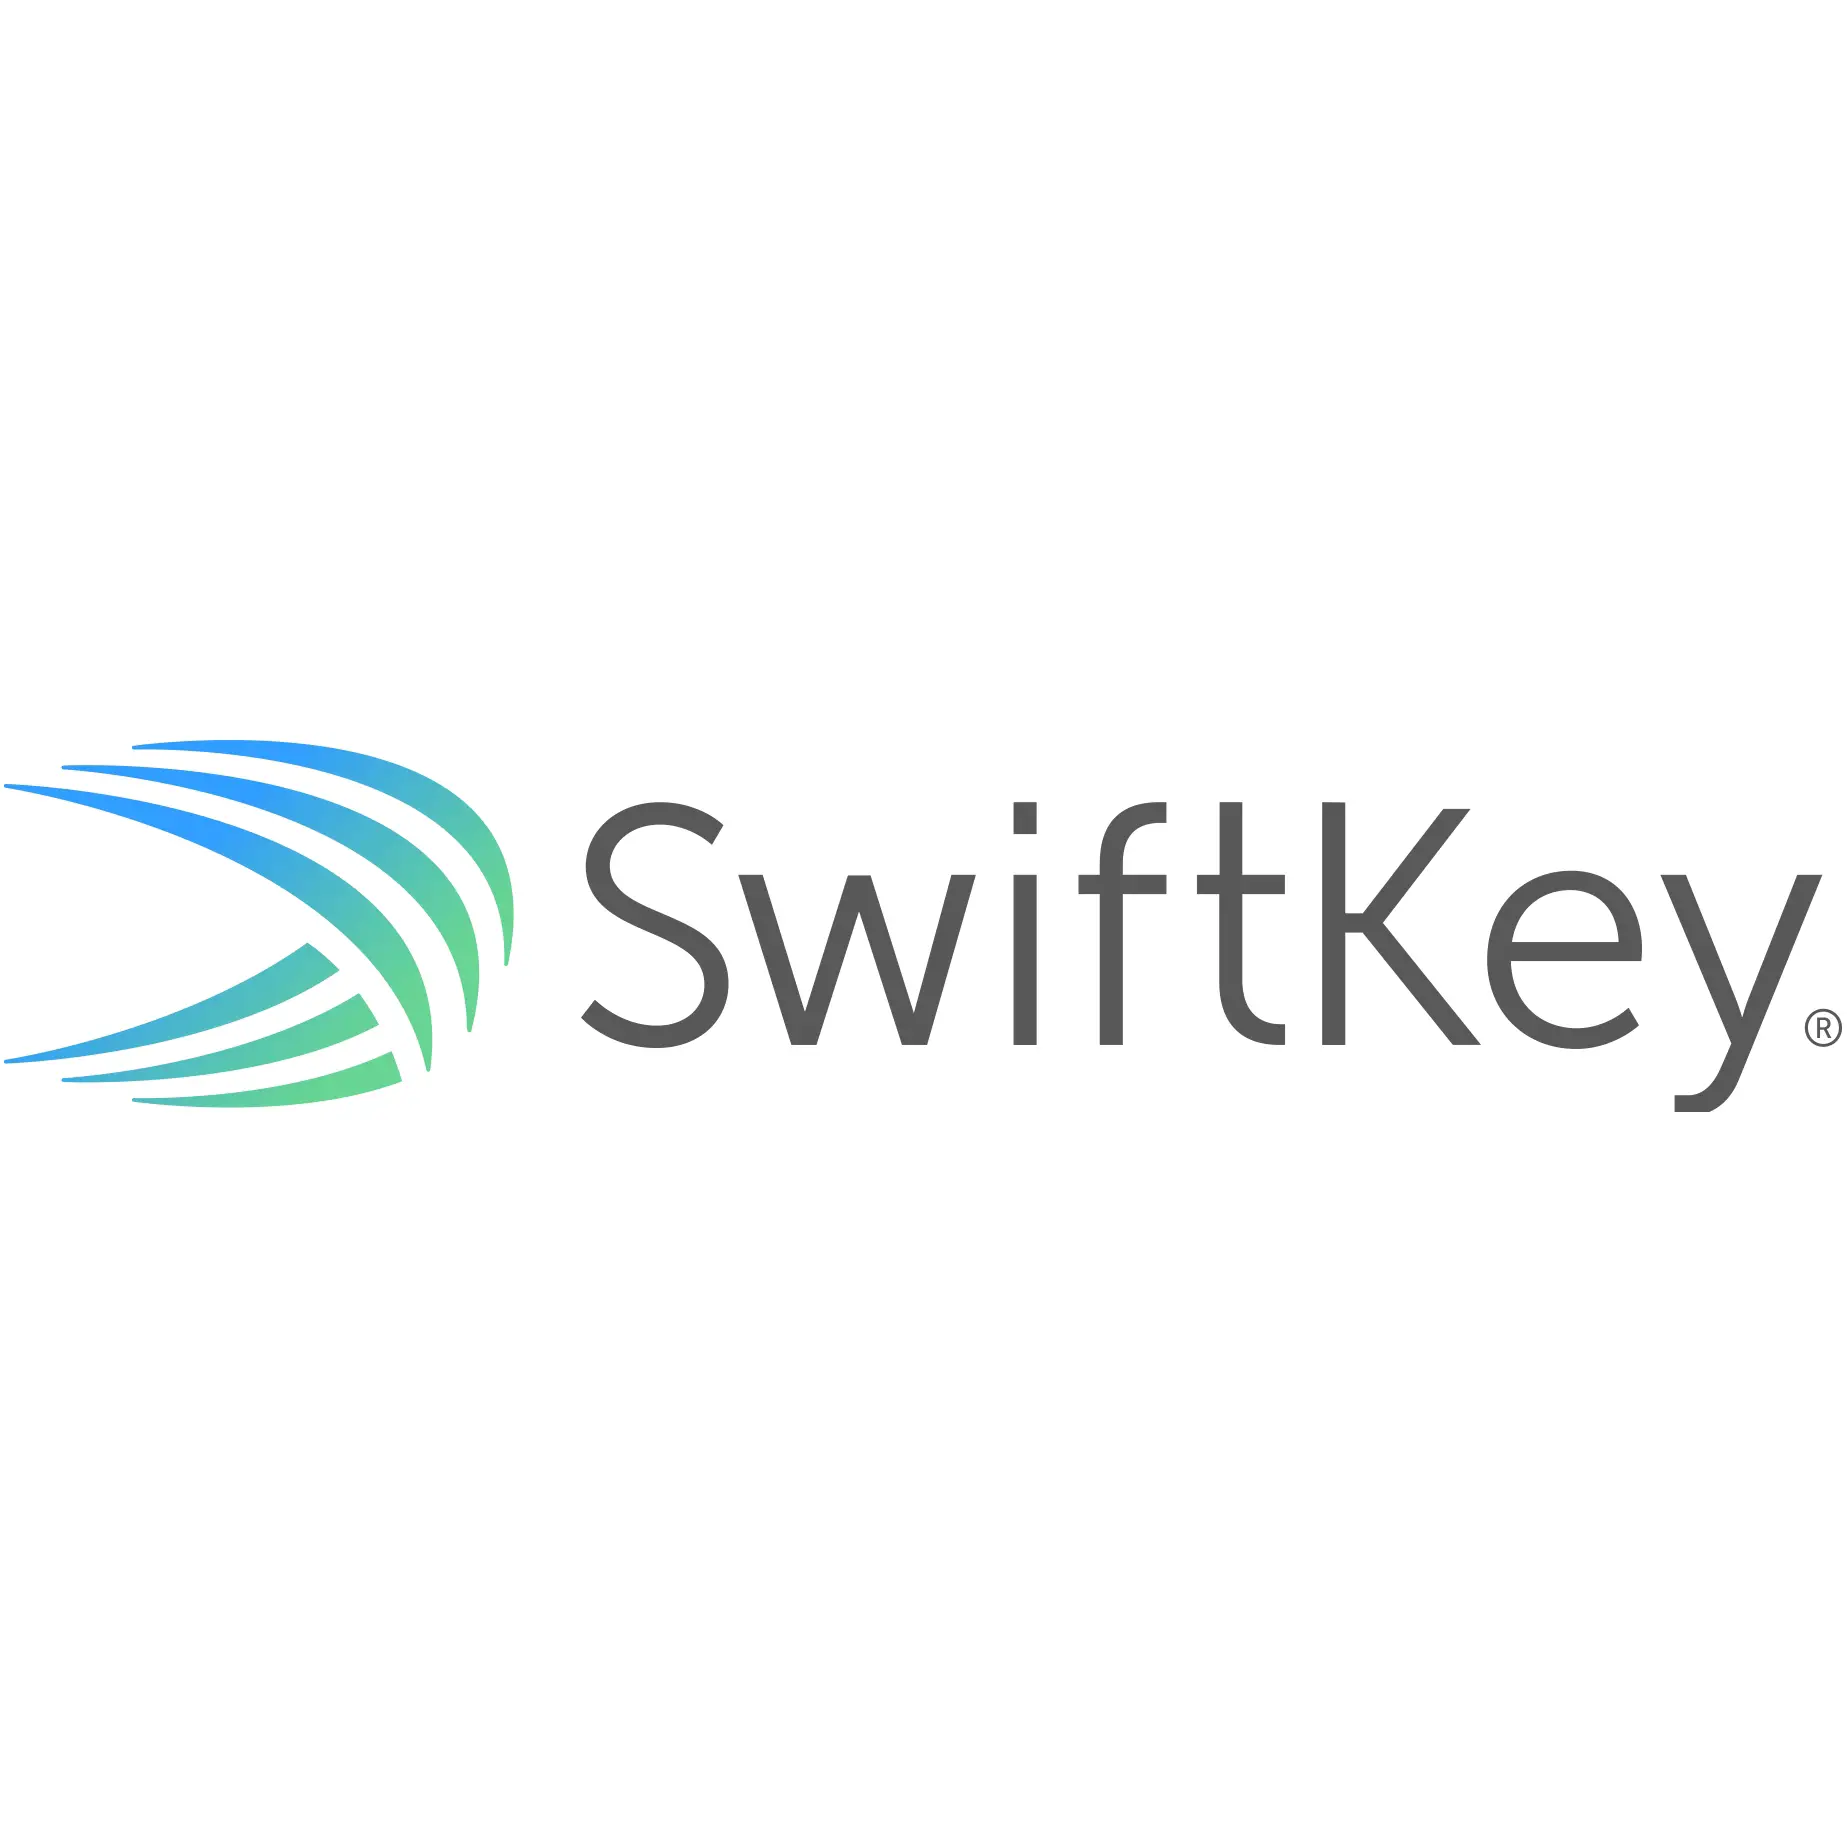 swiftkey head - for some reason we don't have an alt tag here